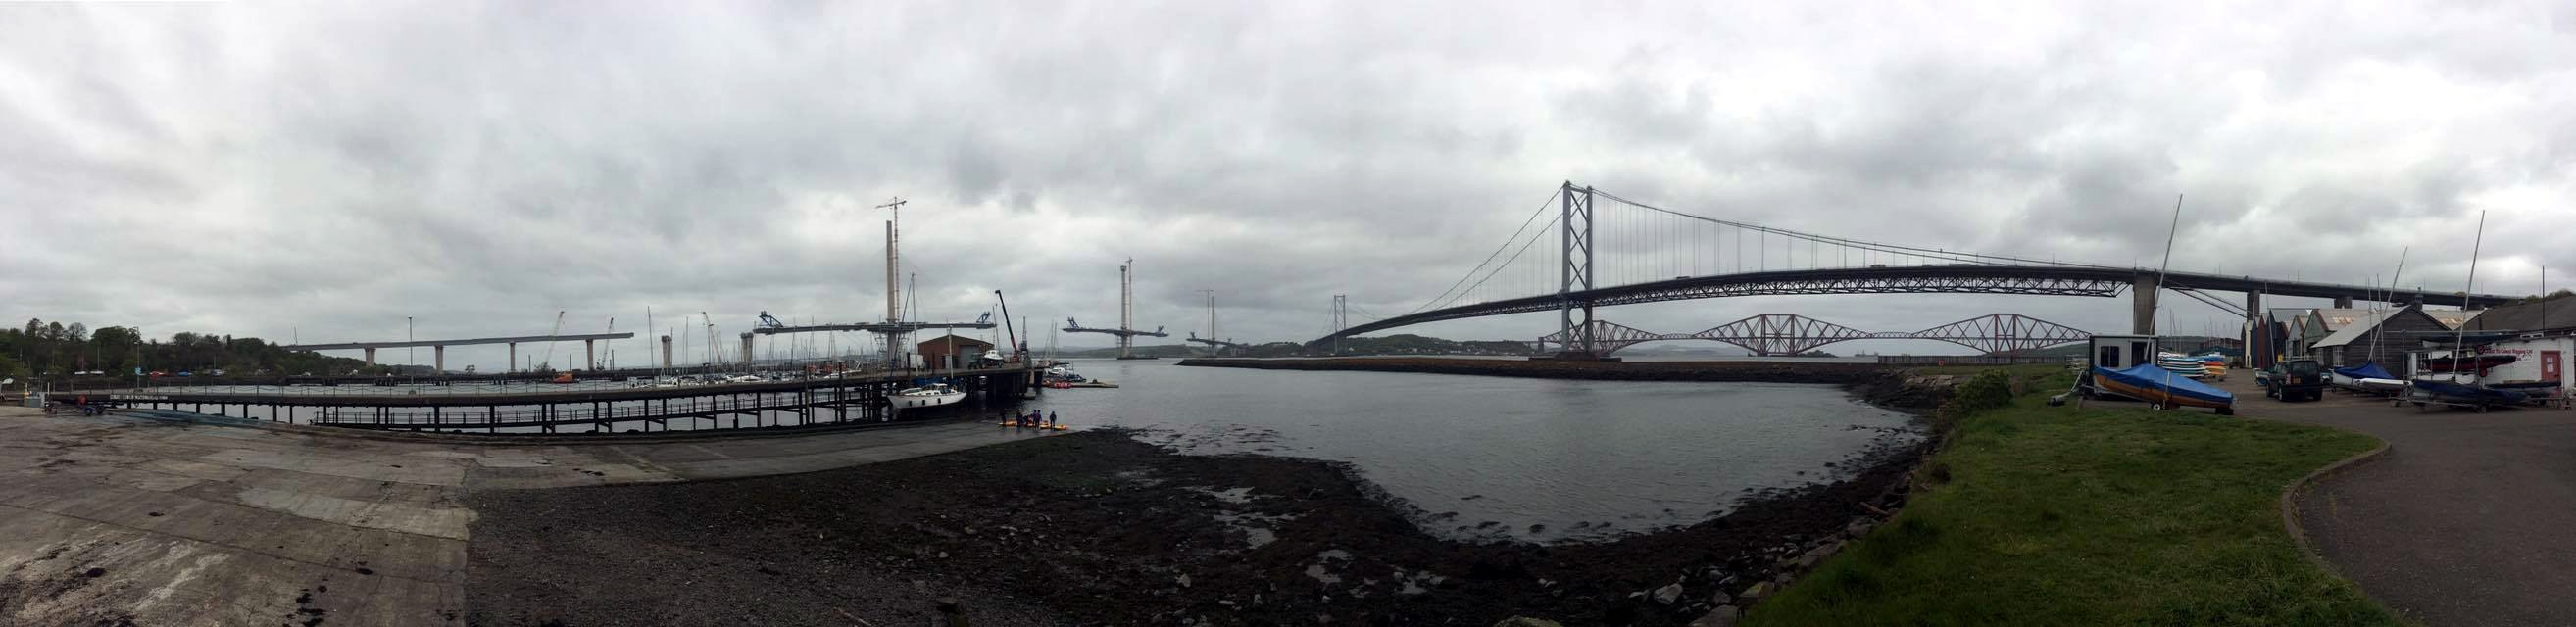 Queensferry-Crossing-13235251_10154096103693449_8489269977739449738_o